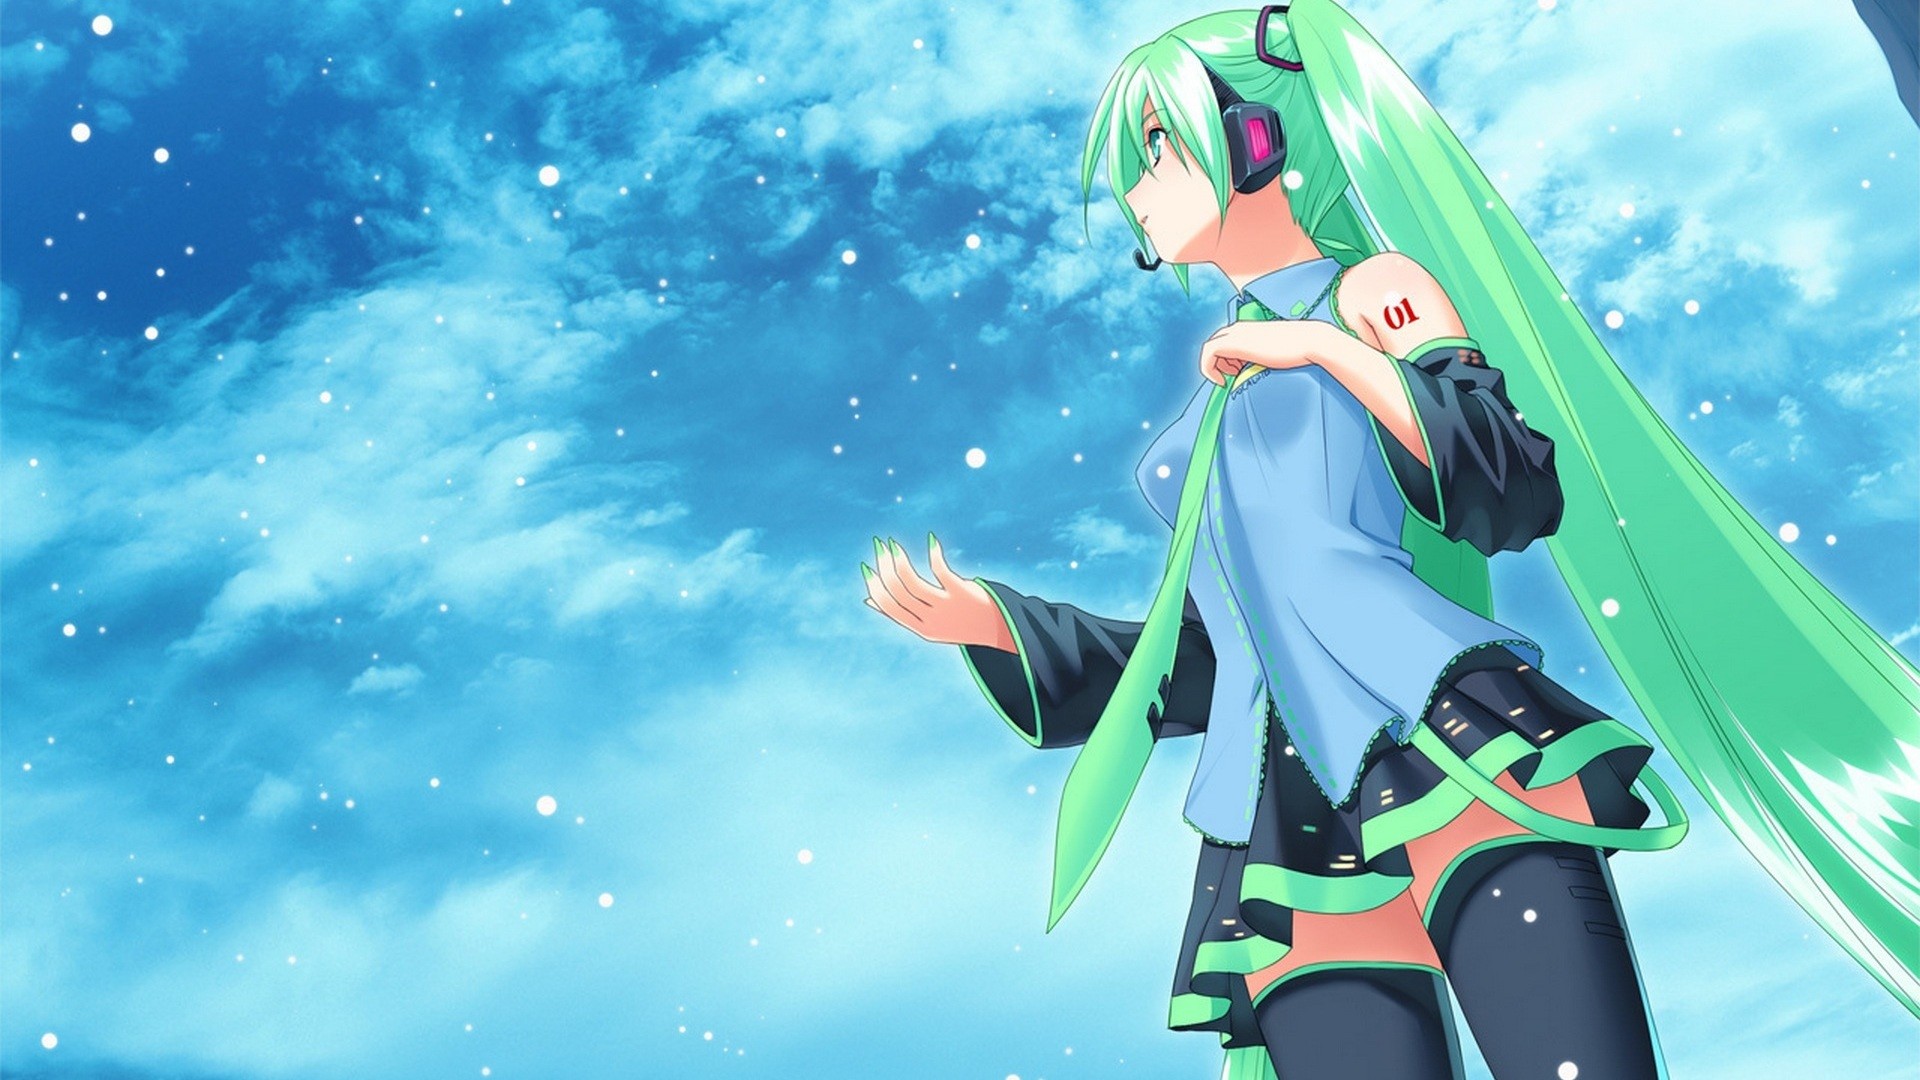 1920x1080 Explore Desktop Wallpapers, Anime Love, and more!